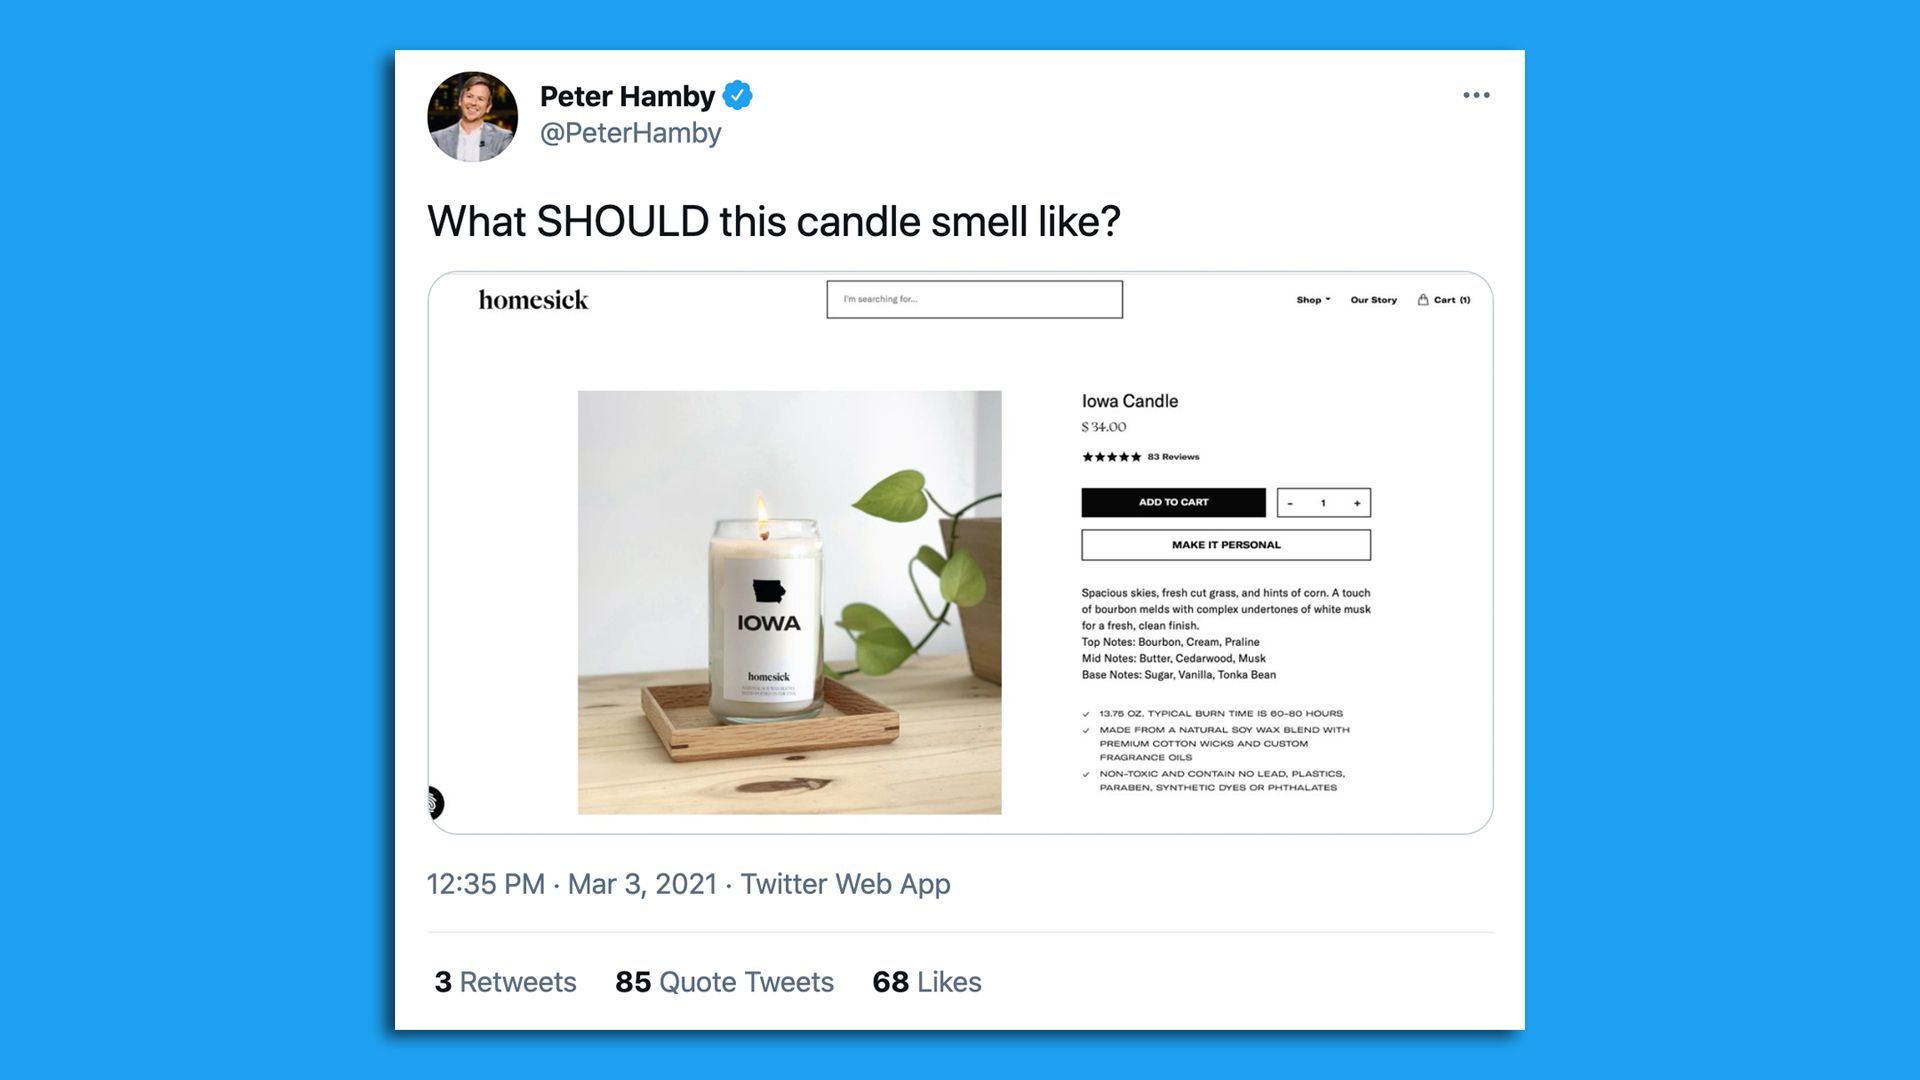 A screenshot of a tweet asking what an Iowa candle should smell like.